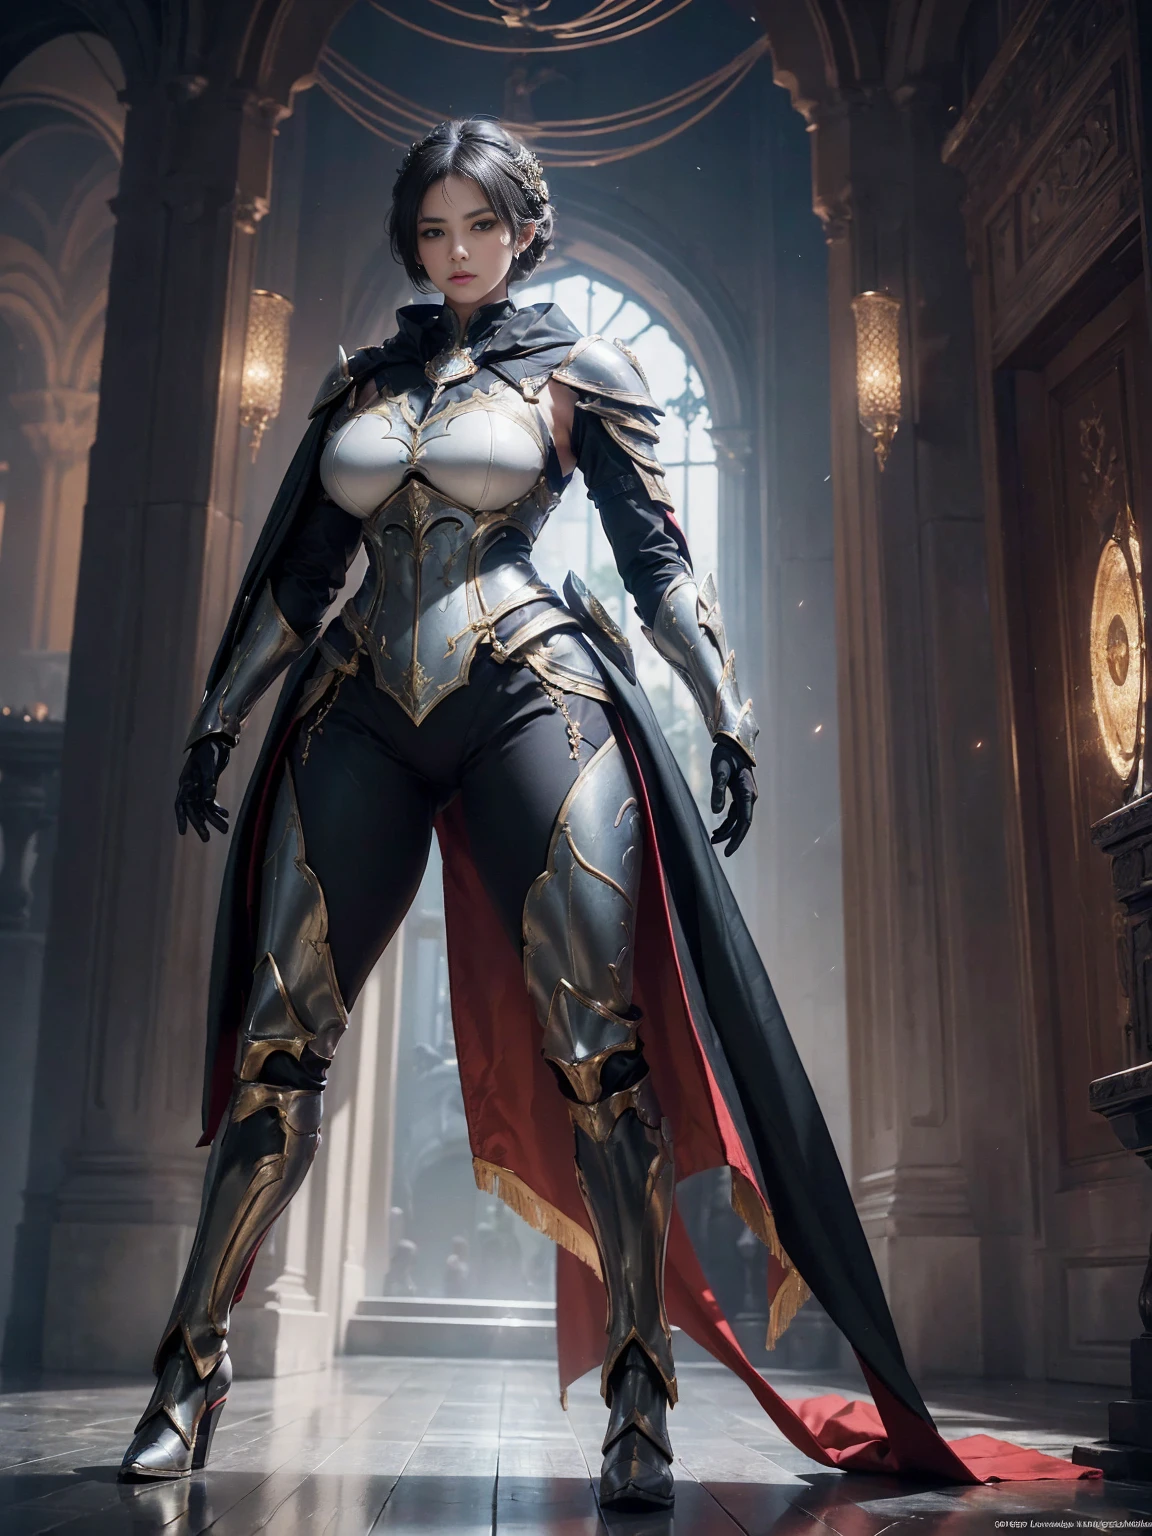 ((1 Full body single woman)) ,(Shooting from front), looking at the camera, centered image, tmasterpiece，A high resolution,Absolutely beautiful, facing camera, Tall and tall，big breast, white short hair with updo, (full coverage armor, Ornately decorated armor, Exquisite details of the armor and pants, warrior, gloves, show armor iron boots, pauldrons with capes,  allure：（Tall：1.4），haughty，Mature temperament，（Wide buttock：1.4），（Thick thighs：1.4), Rich scene detail，In the midst of the war，are standing，action